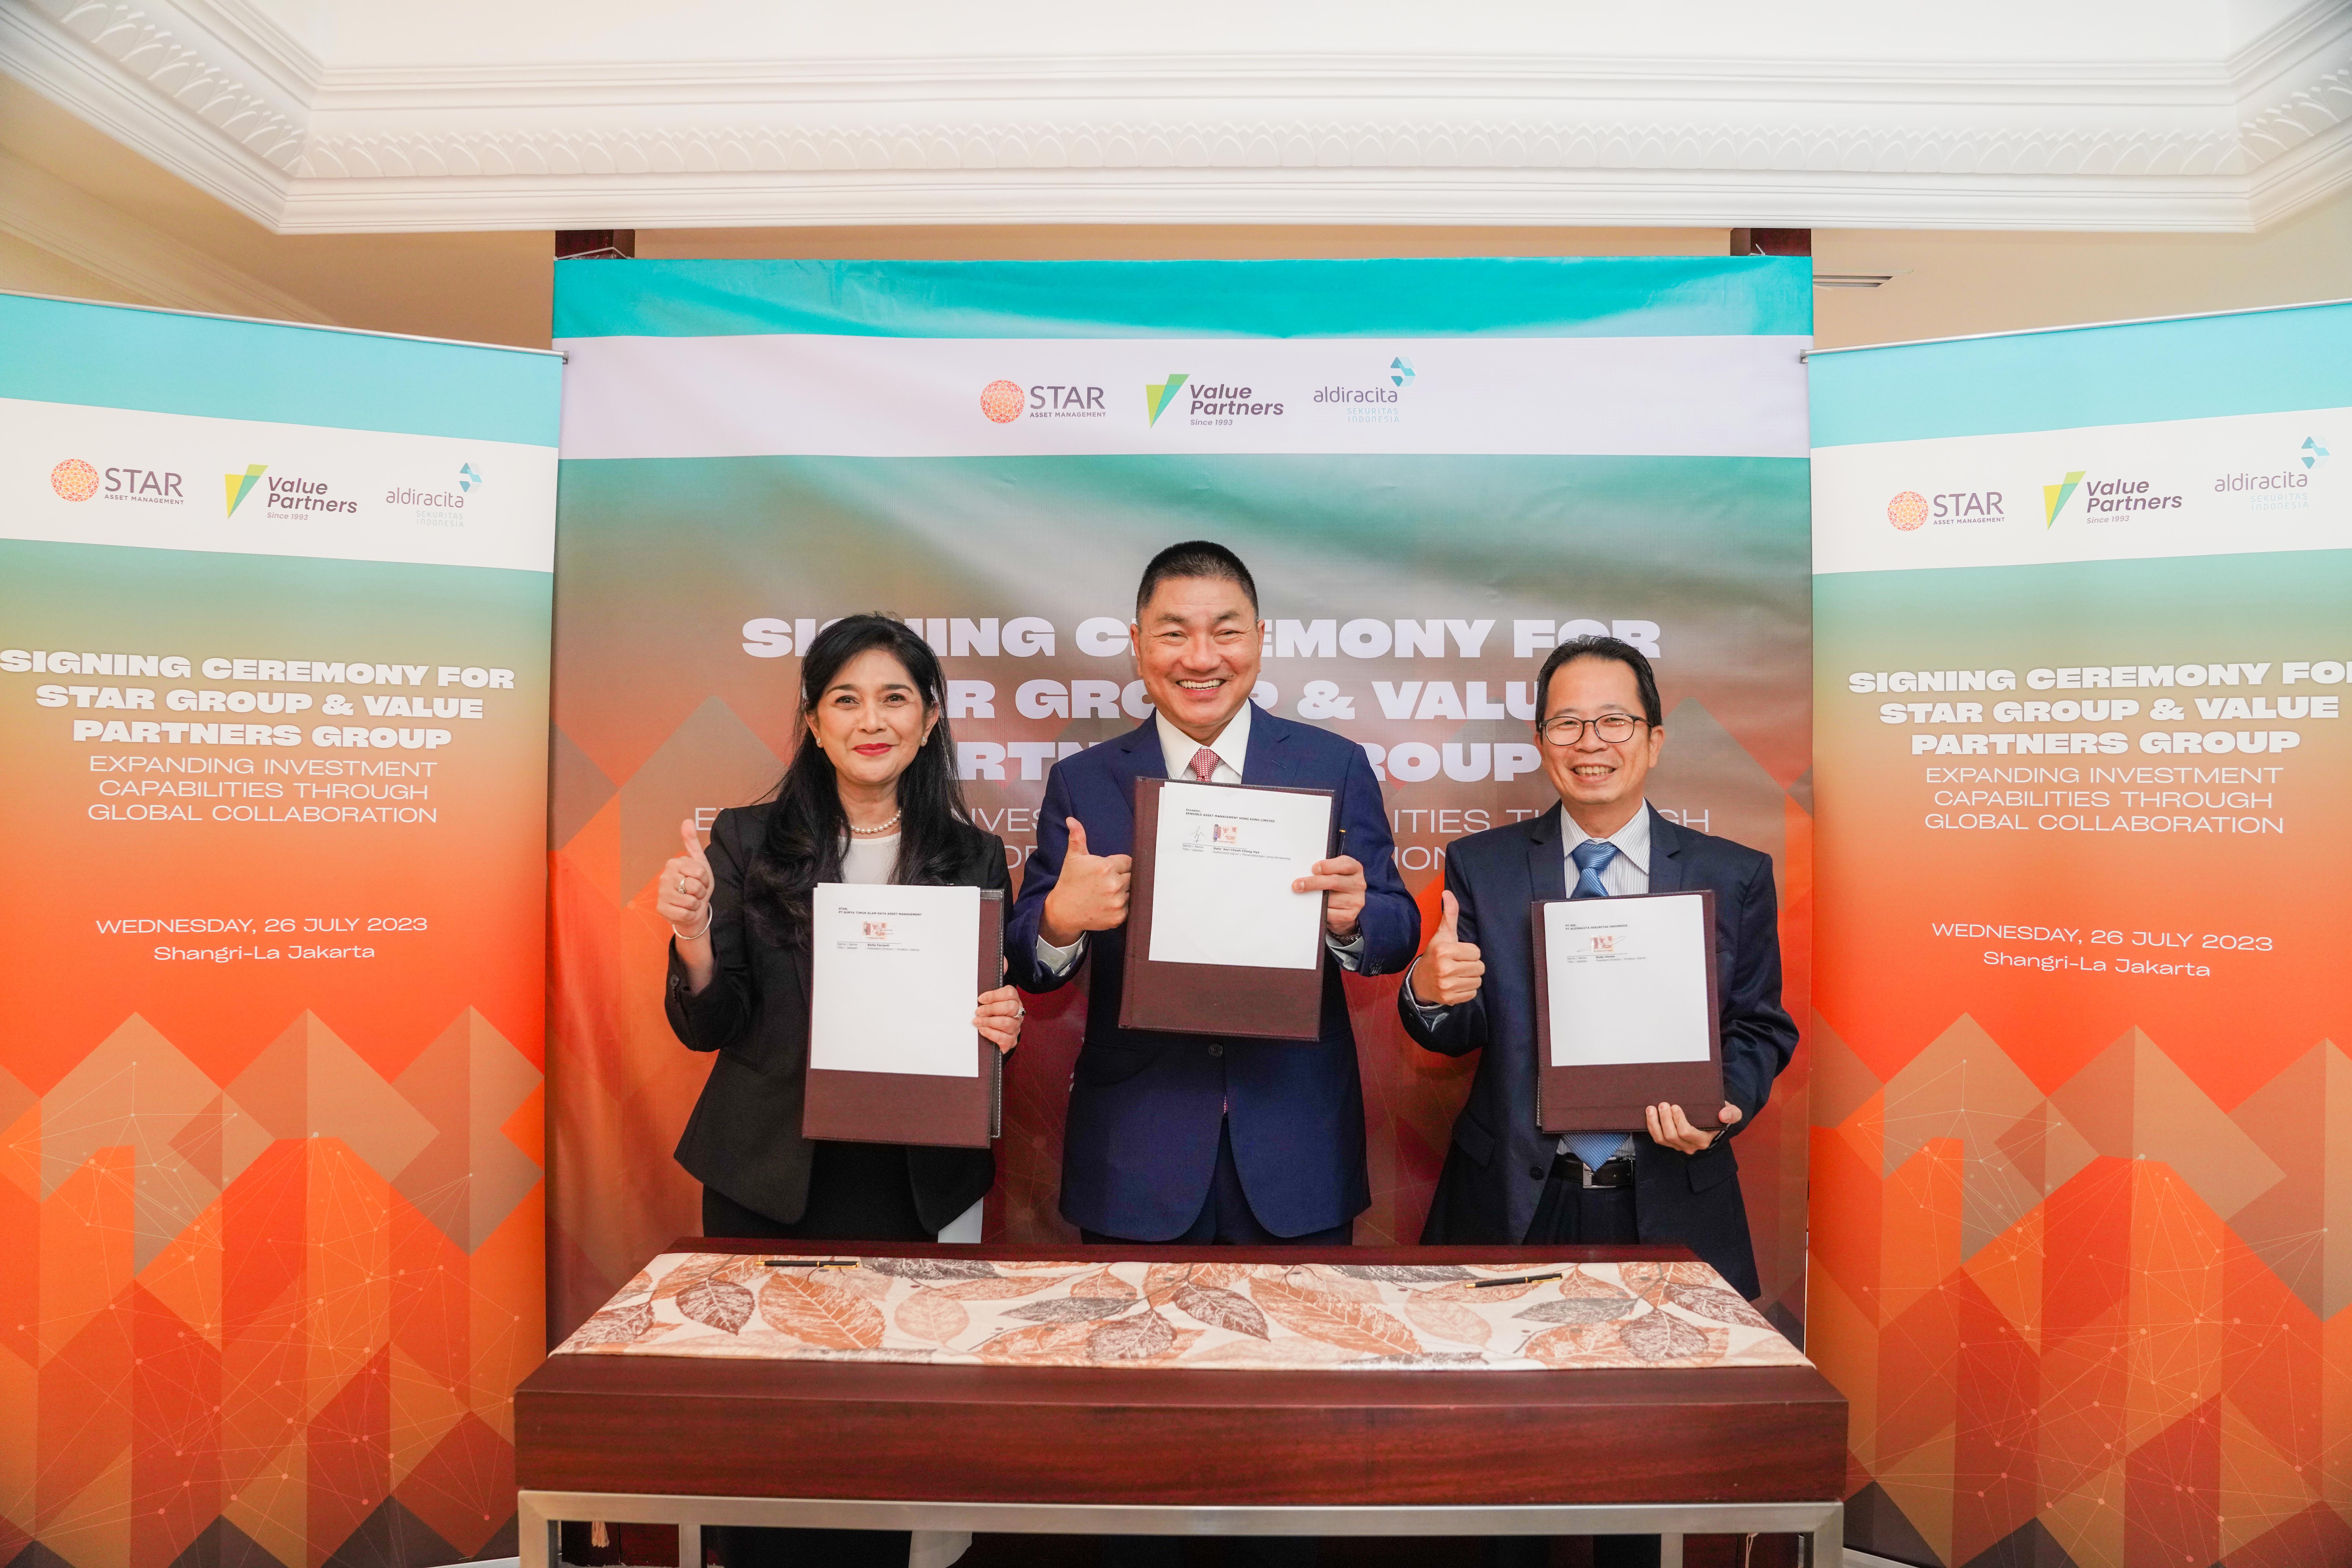 Dato’ Seri Cheah Cheng Hye, Co-chairman and Co-CIO of Value Partners (centre), together with Mrs Reita Farianti, President Director, Star Asset Management (left), and Mr Rudy Utomo, President Director, Aldiracita Sekuritas (right)